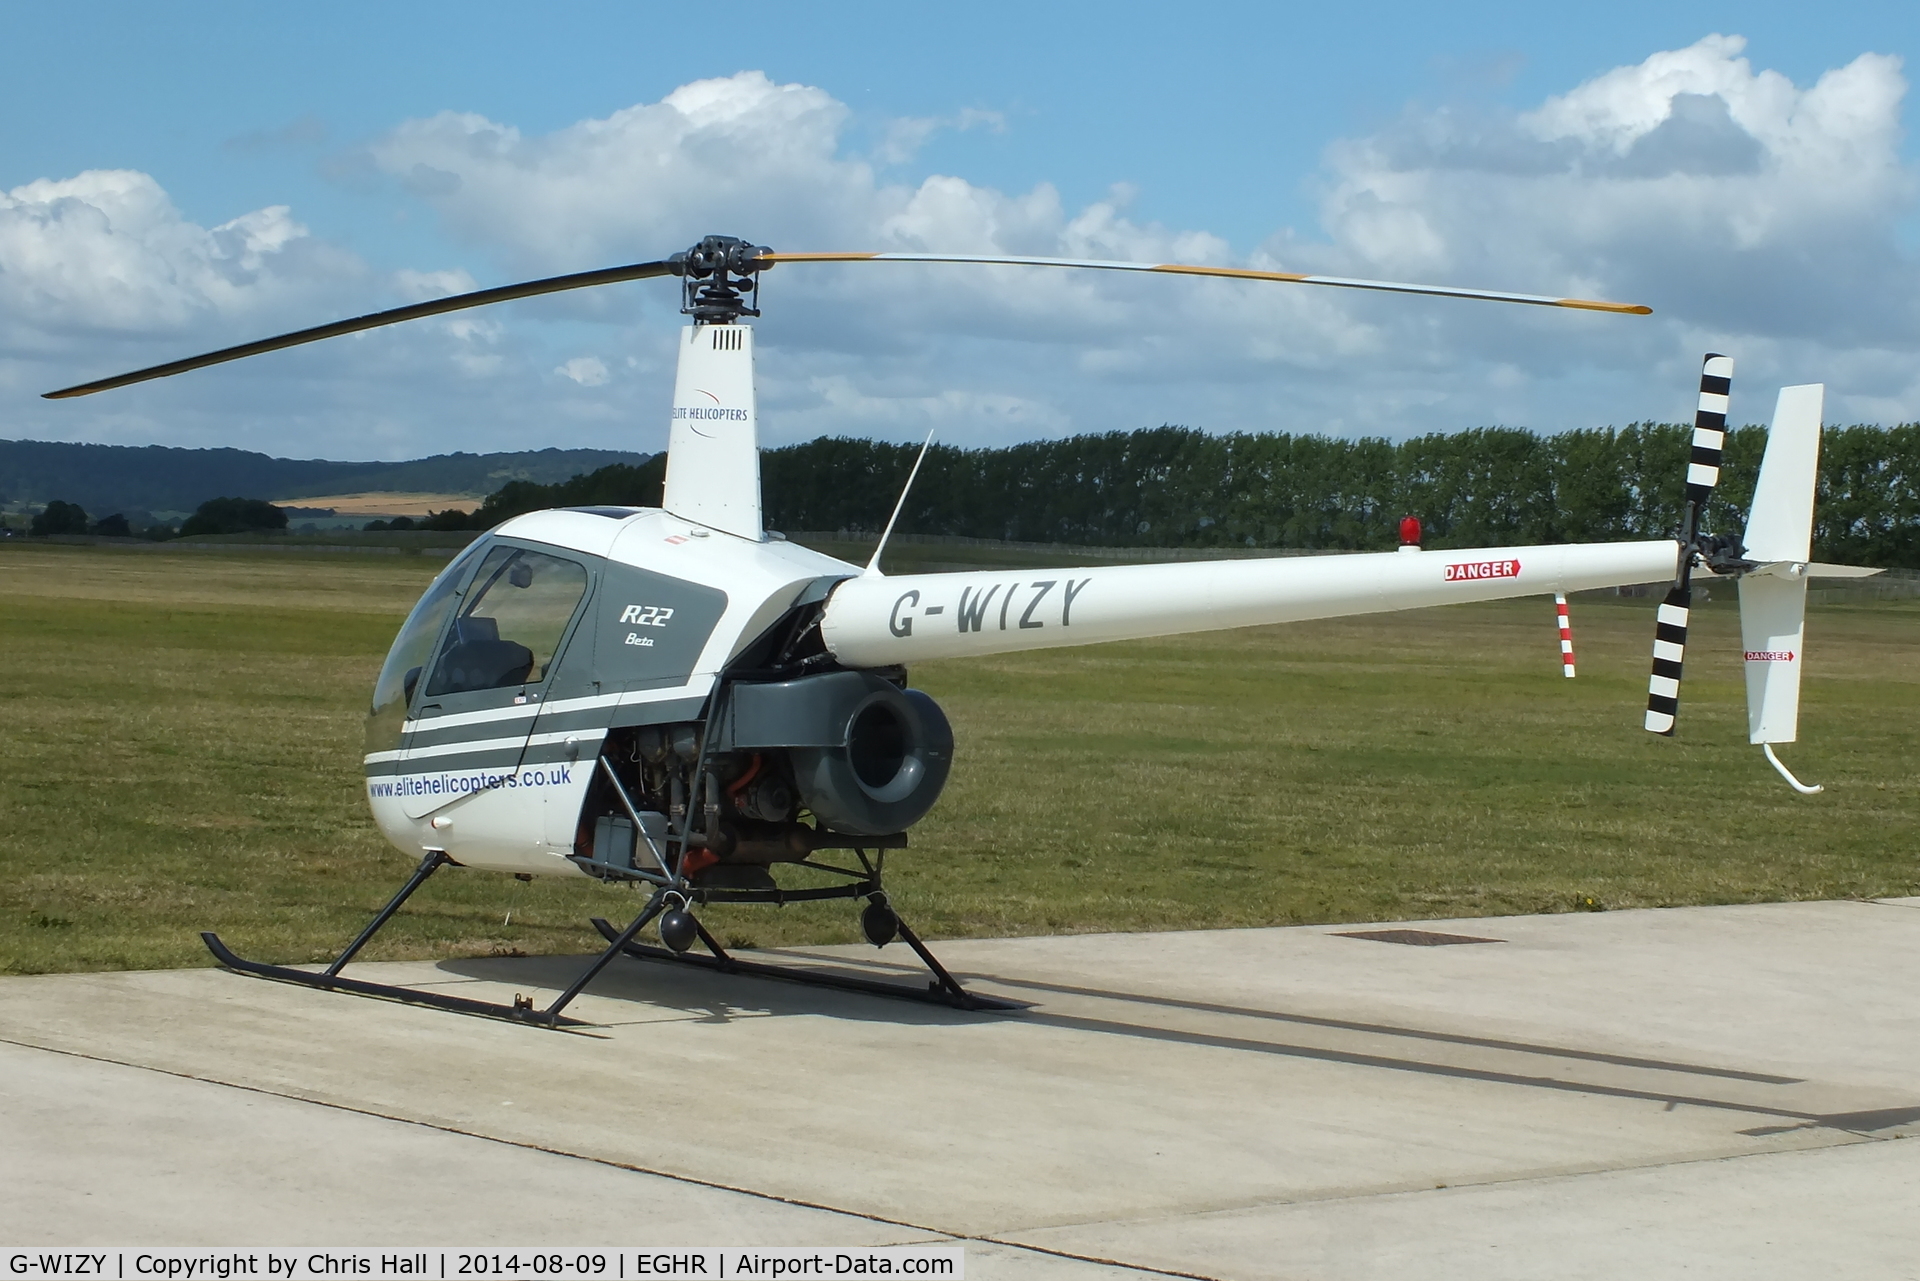 G-WIZY, 1986 Robinson R22 Beta C/N 0566, at Goodwood airfield